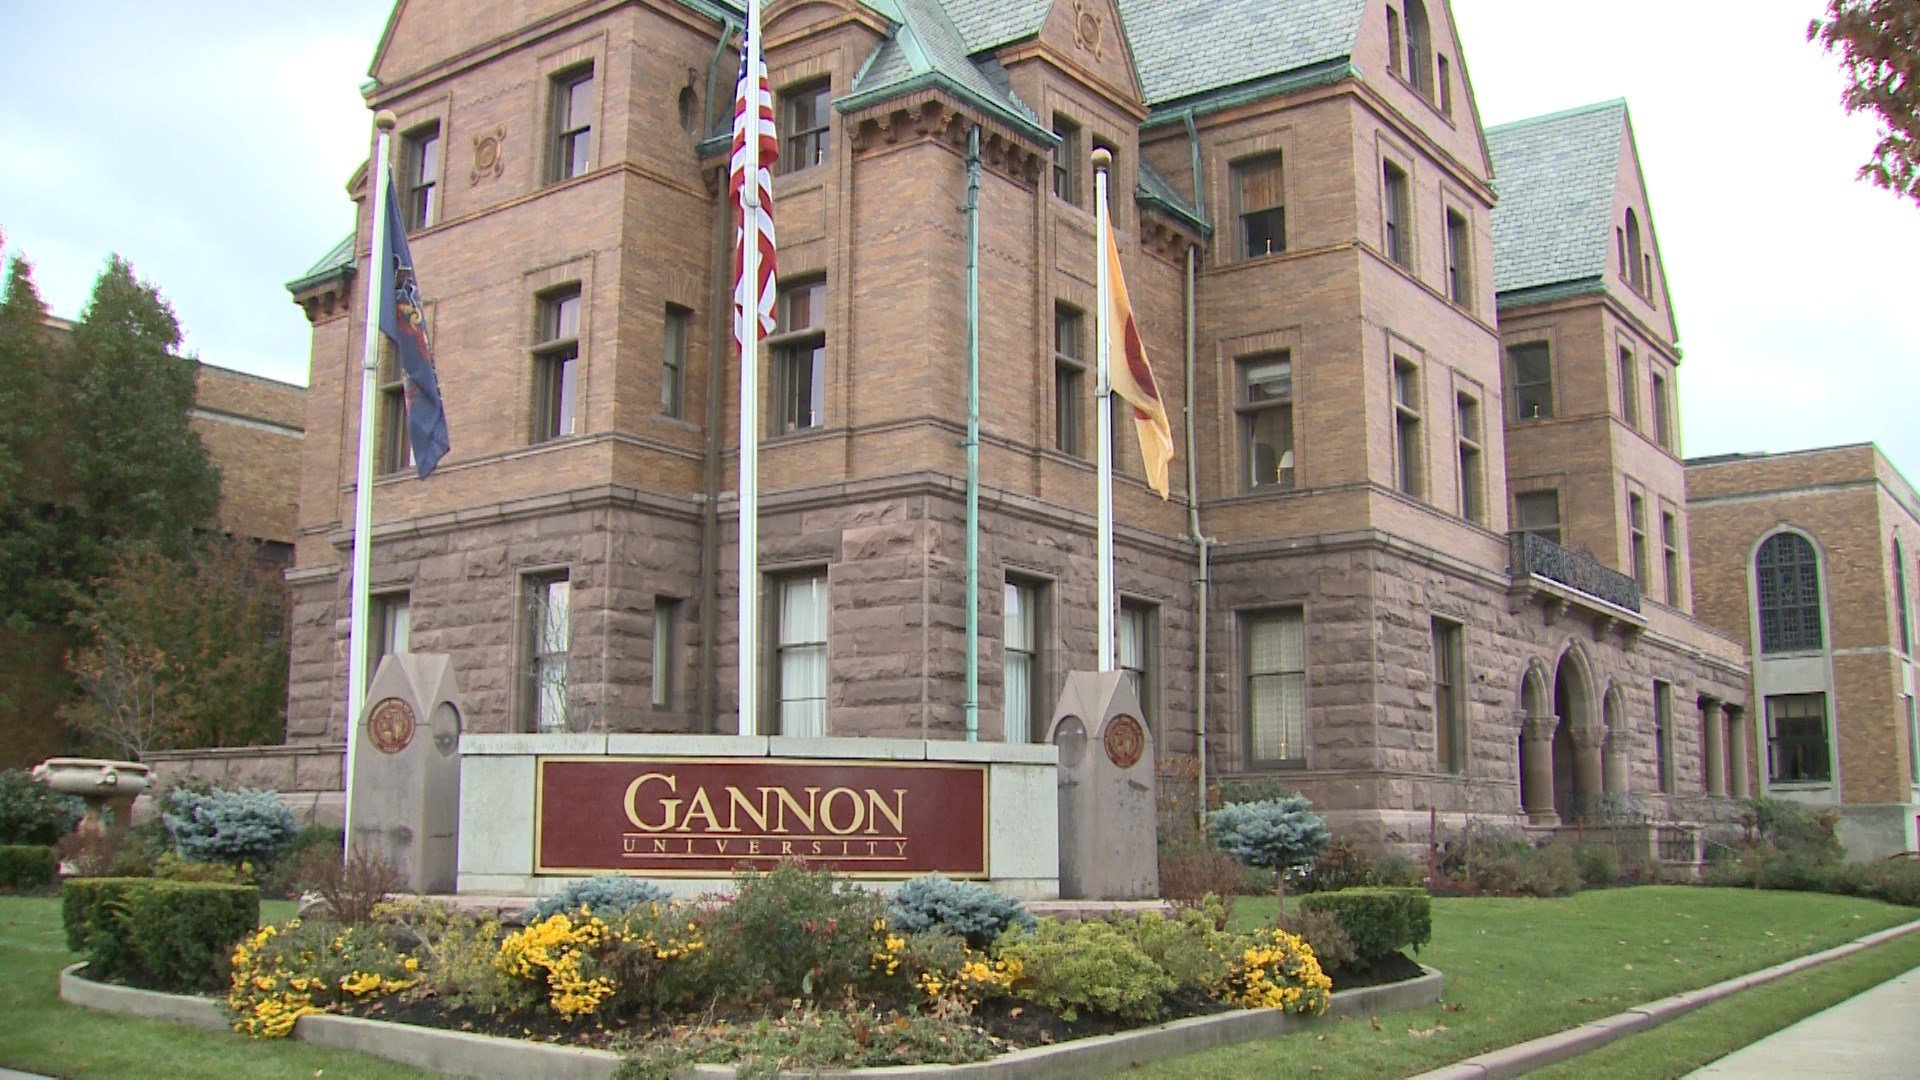 Gannon Pledges to Prepare Future Educators with Skills to Thrive in Digital Learning Environments